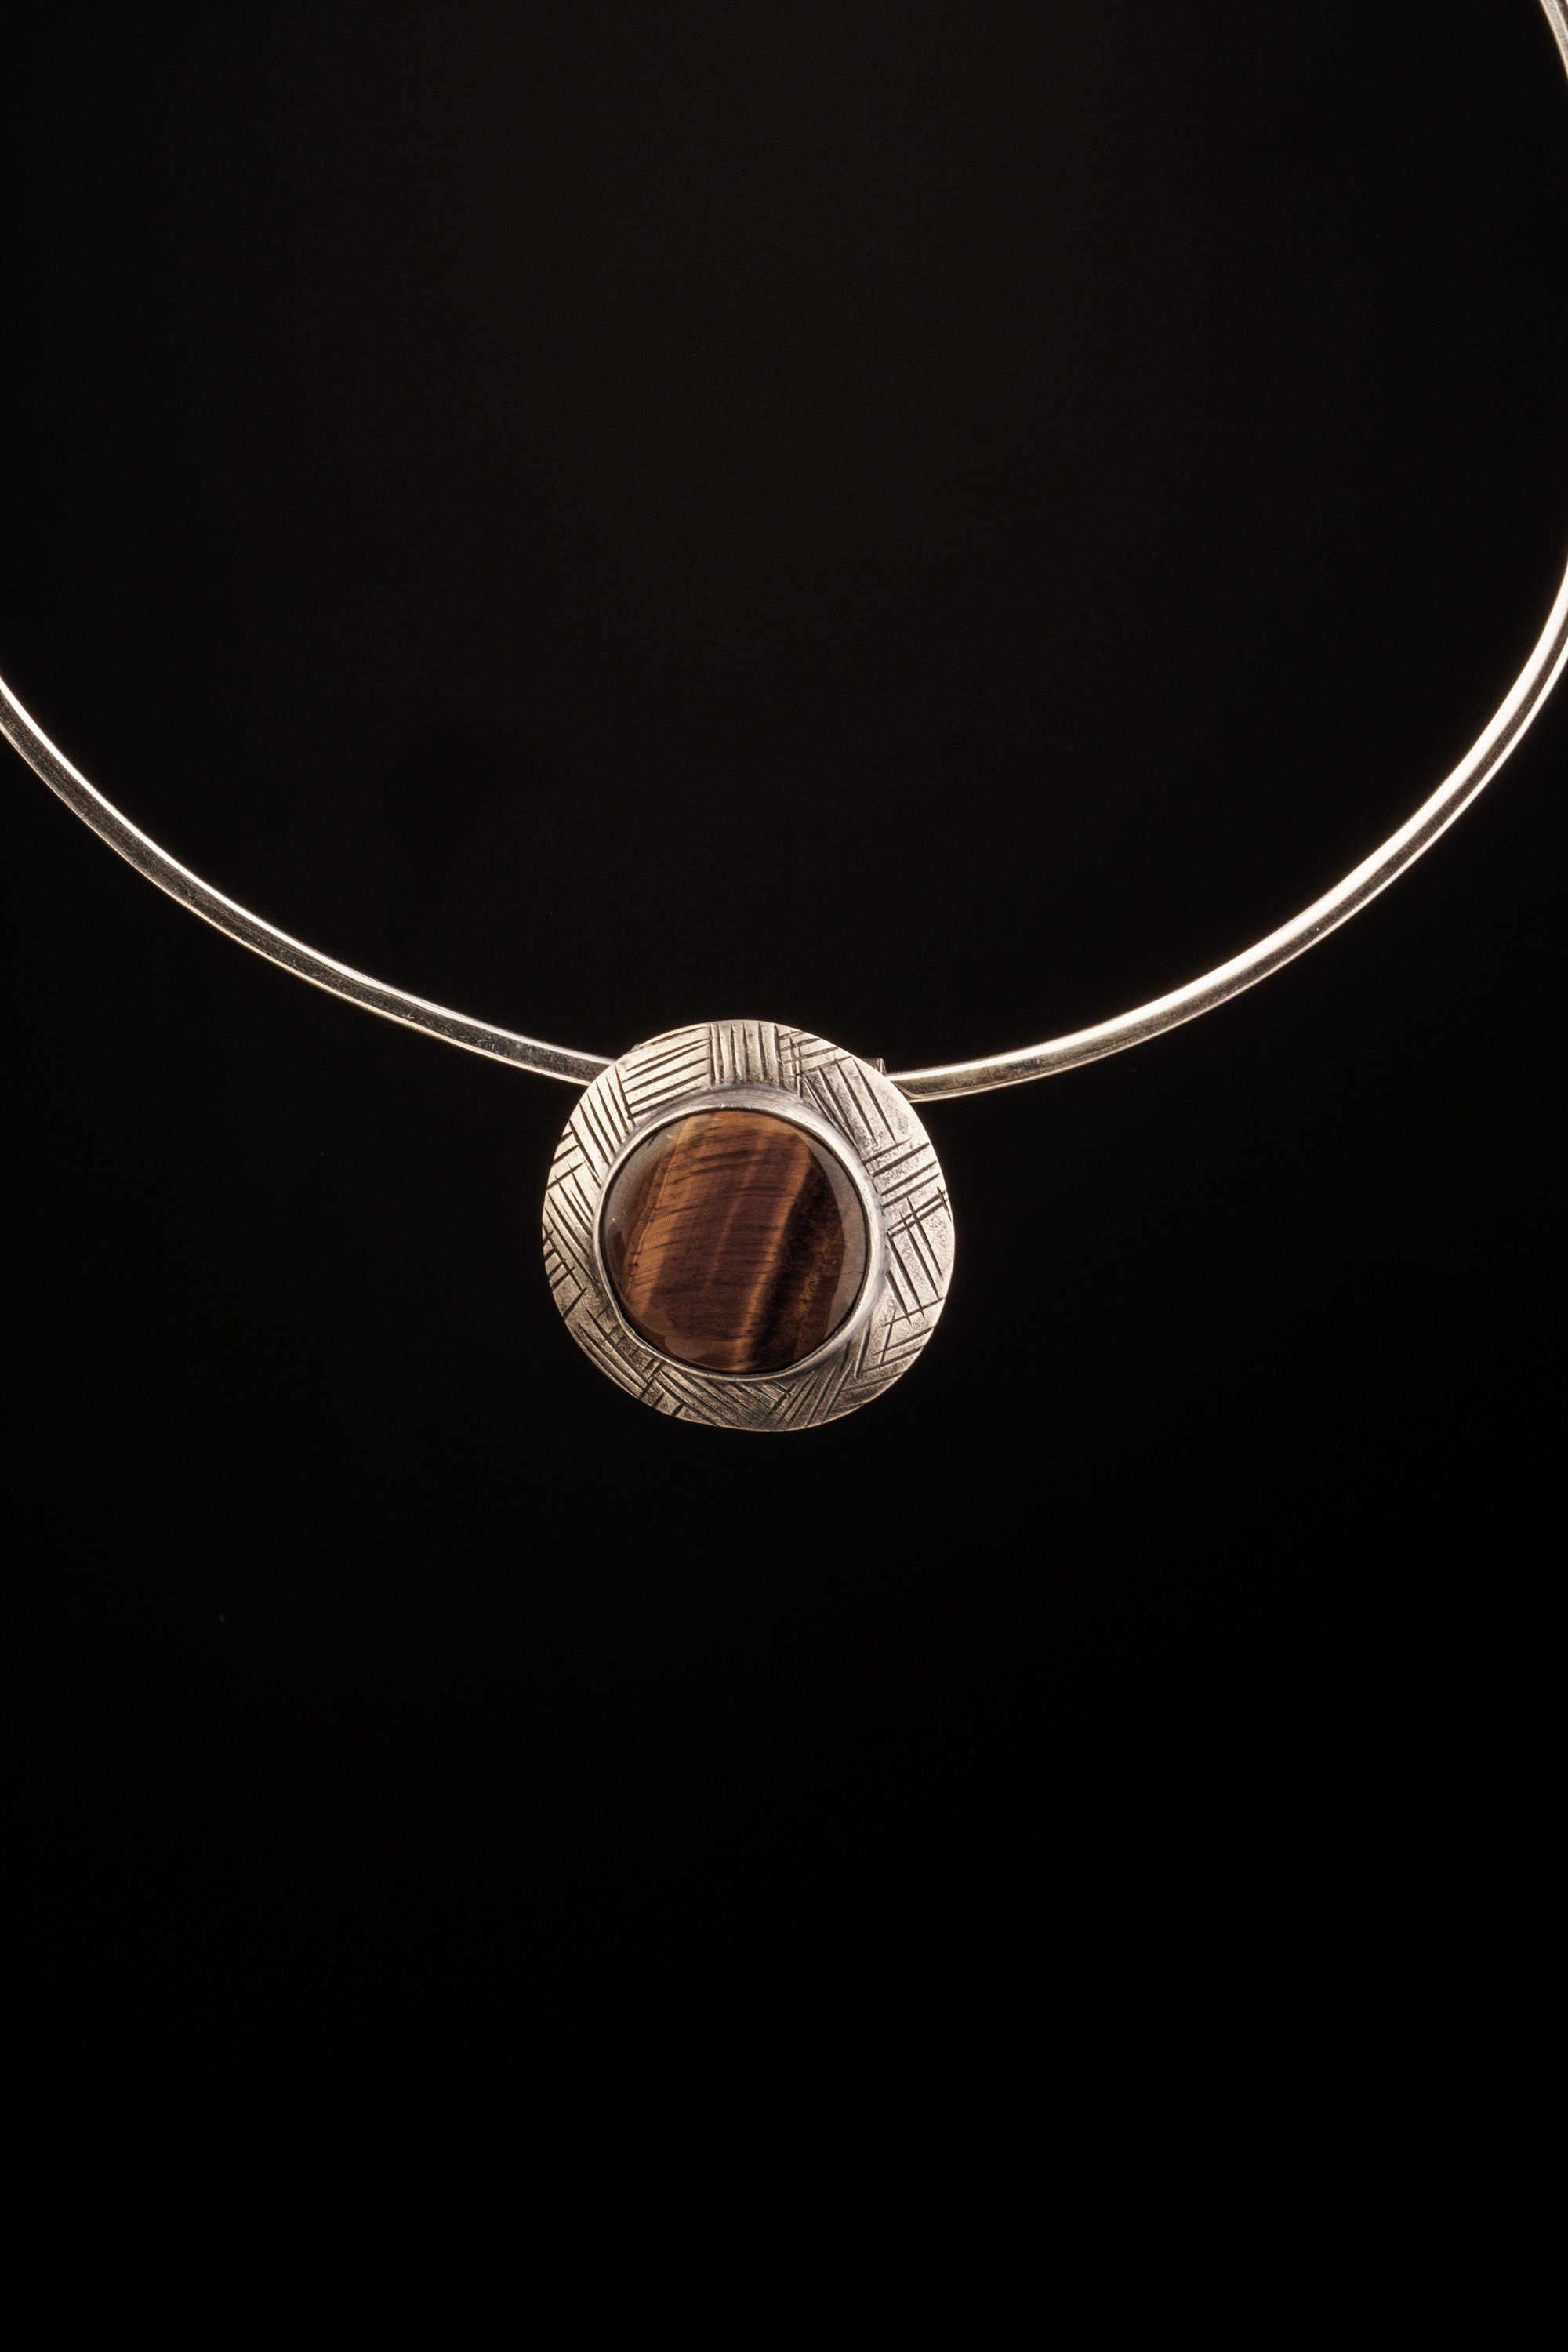 Round Tiger Eye Cabochon - Stack Pendant - Crisscrossed textured & oxidised - Sterling Silver - Crystal Necklace